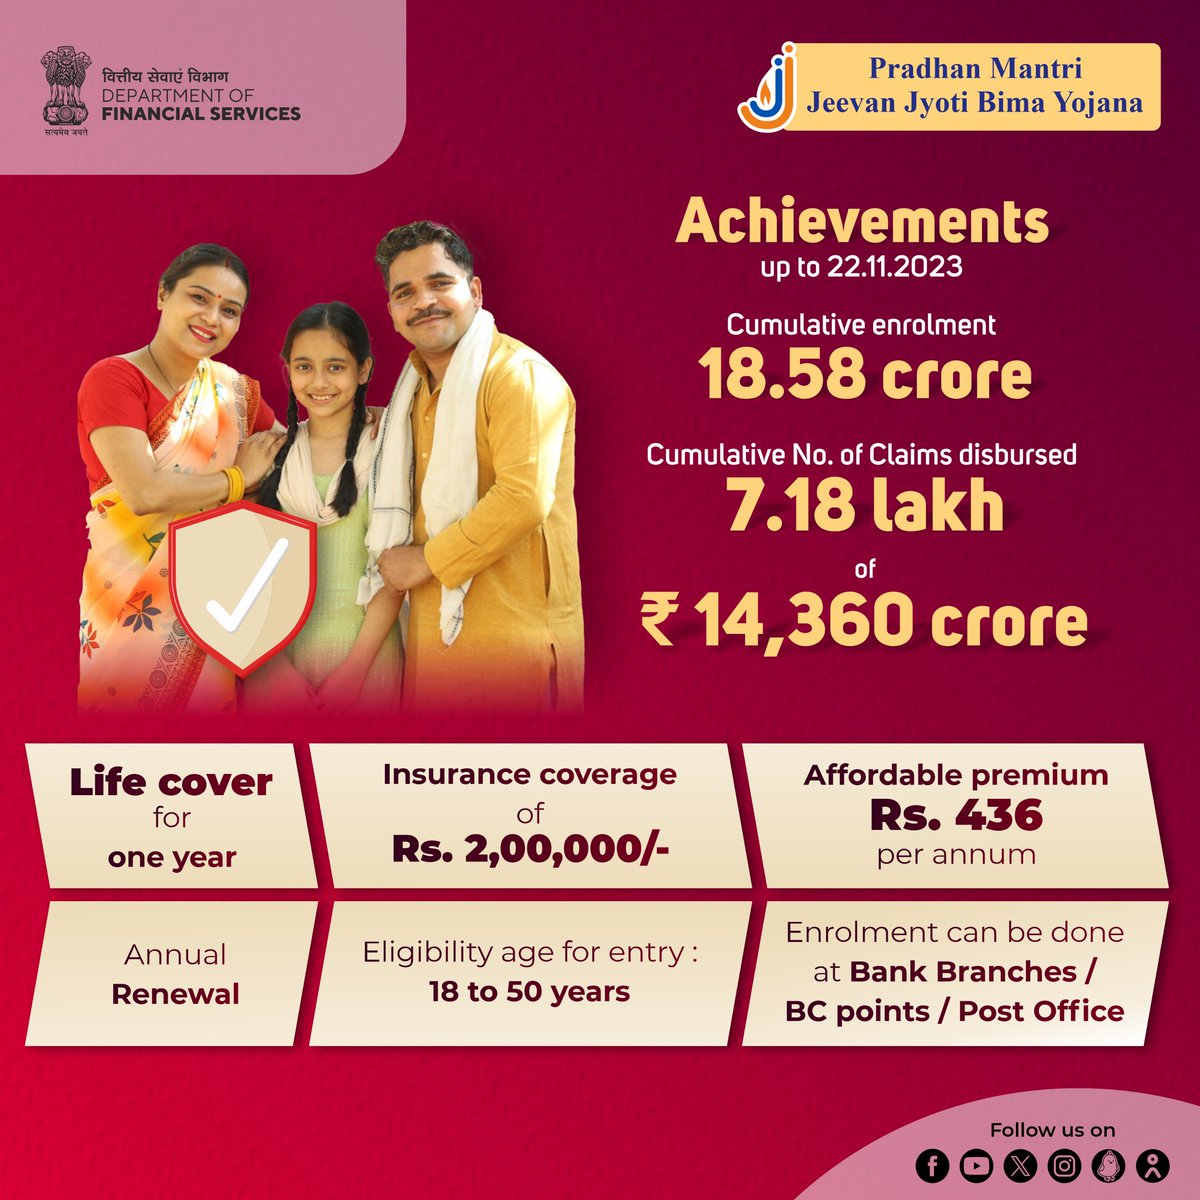 Pradhan Mantri Jeevan Jyoti Bima Yojana #PMJJBY provided security to more than 18 crore beneficiaries and their loved ones from uncertainty of life with insurance coverage of ₹2 Lakh. 
#JanSuraksha 
#ViksitBharat 
#FinMinReview2023